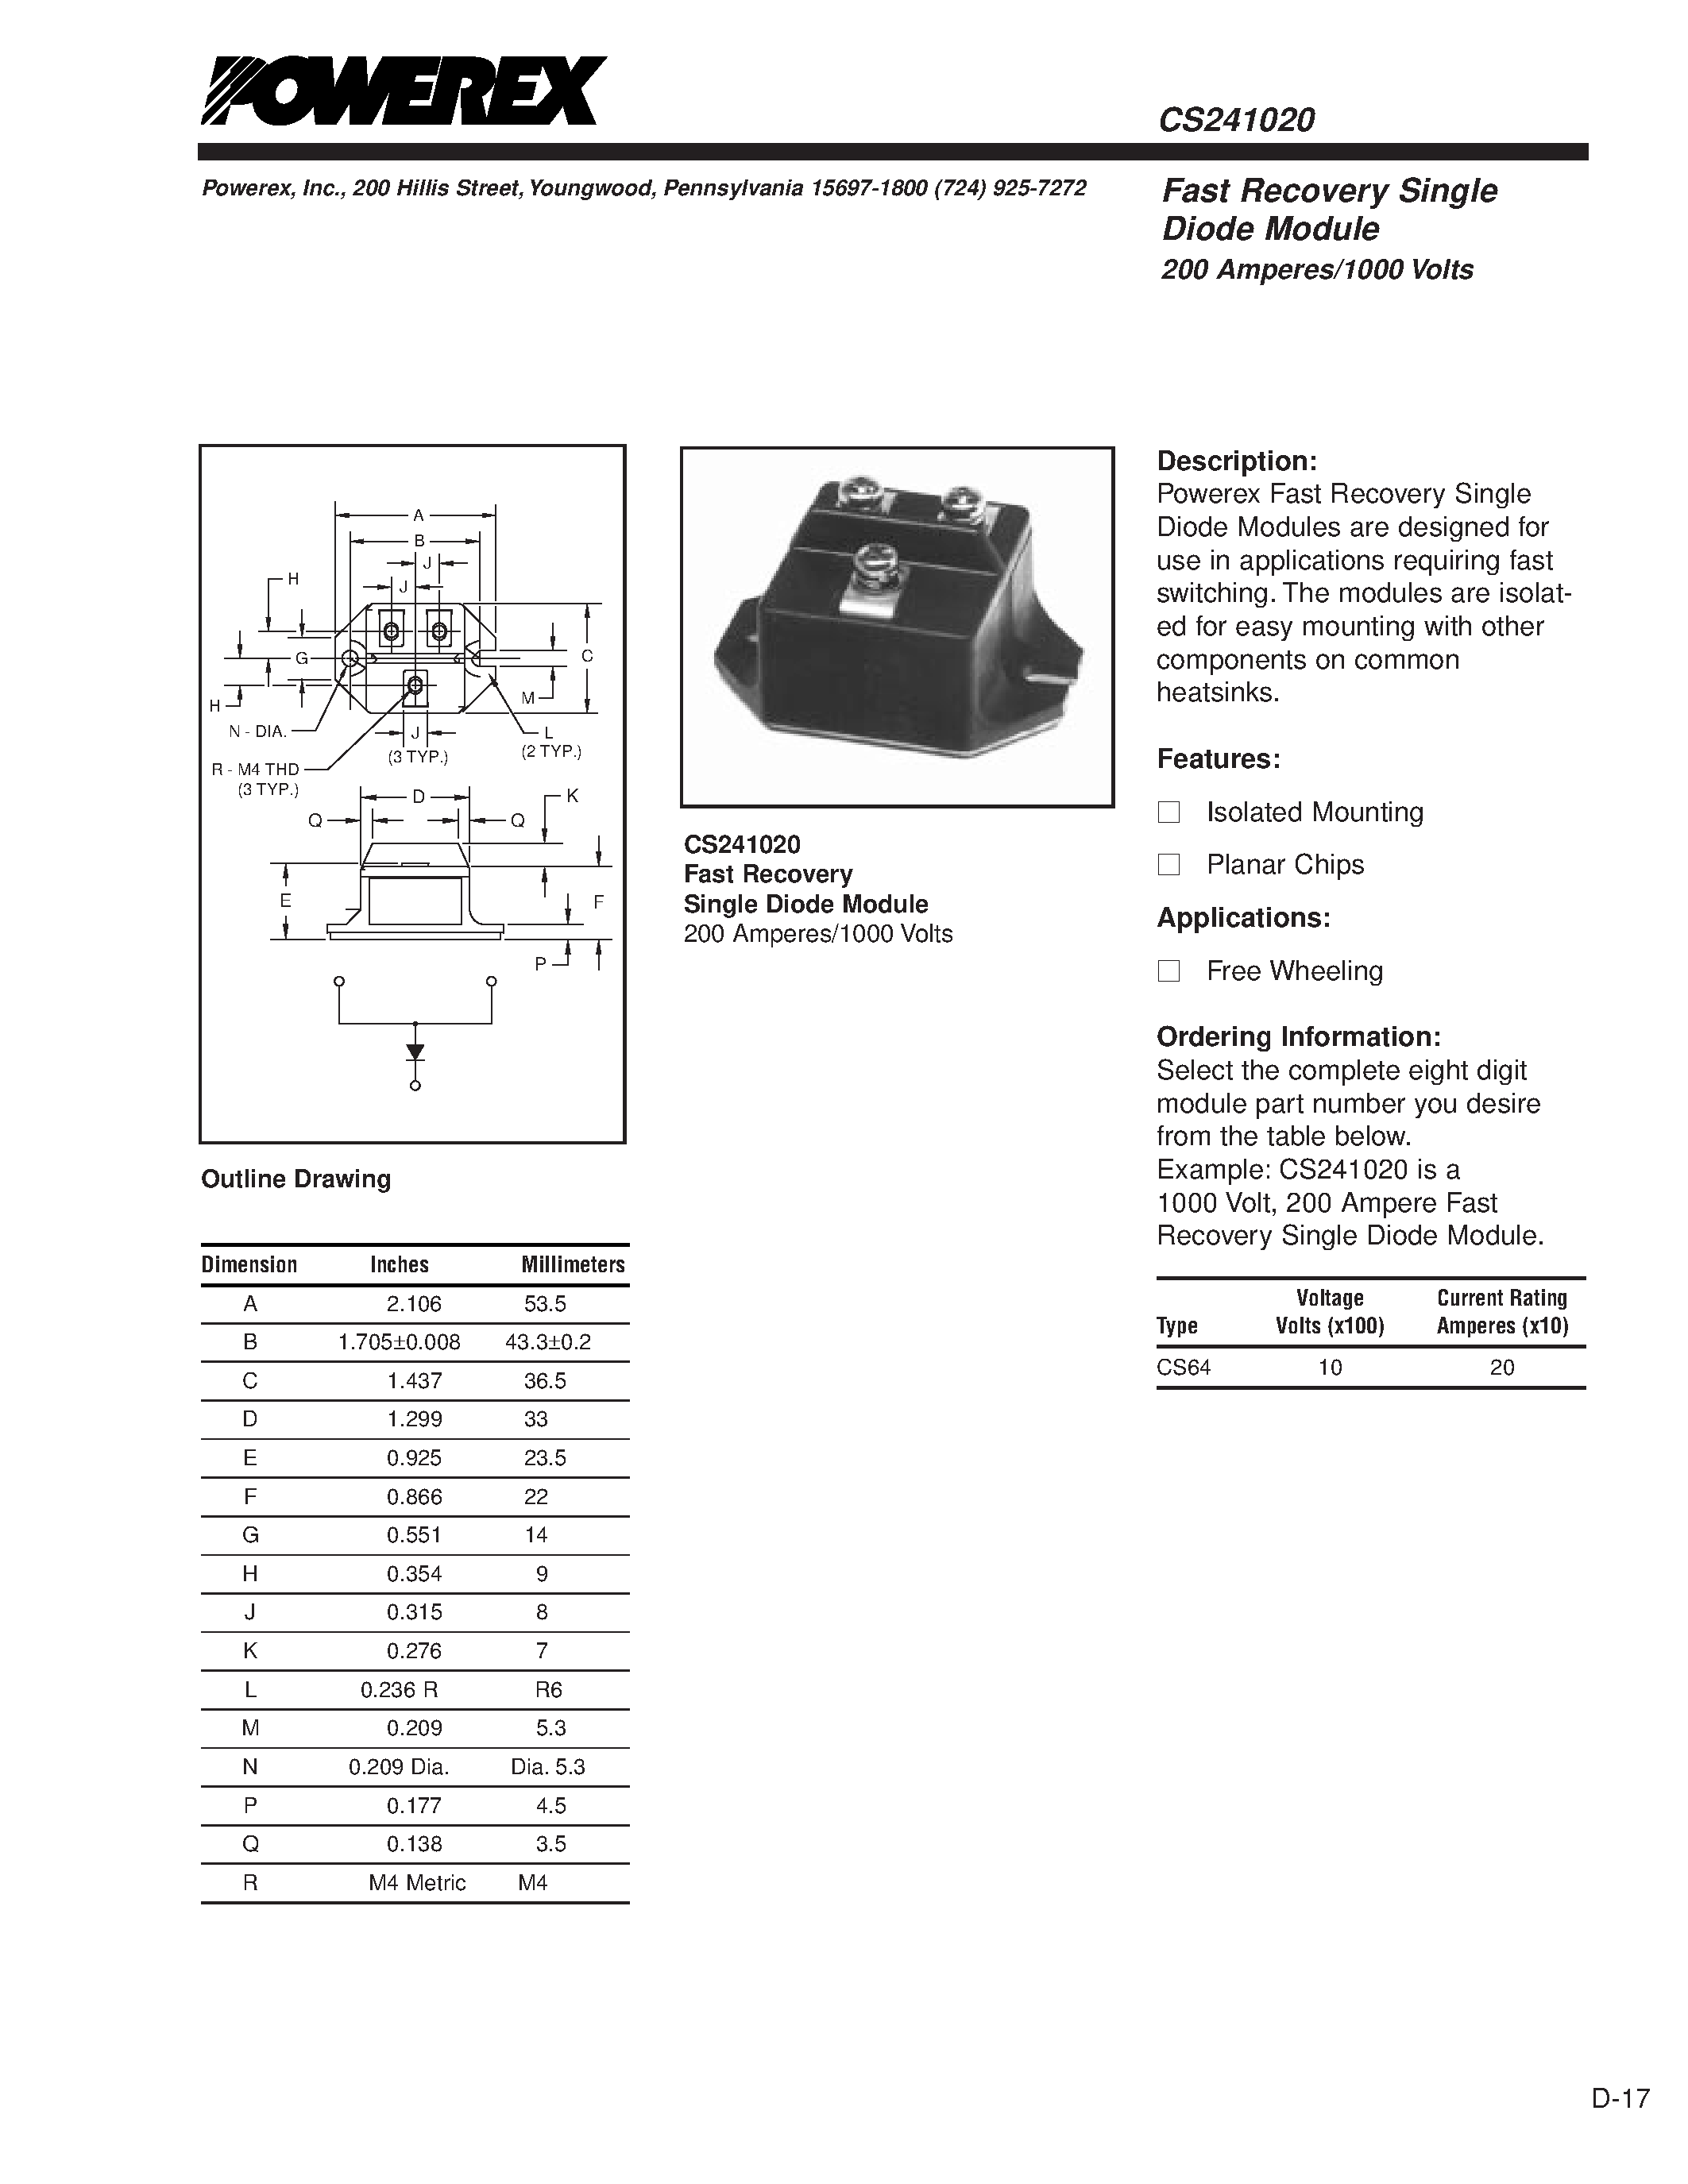 Даташит CS241020 - Fast Recovery Single Diode Module 200 Amperes/1000 Volts страница 1